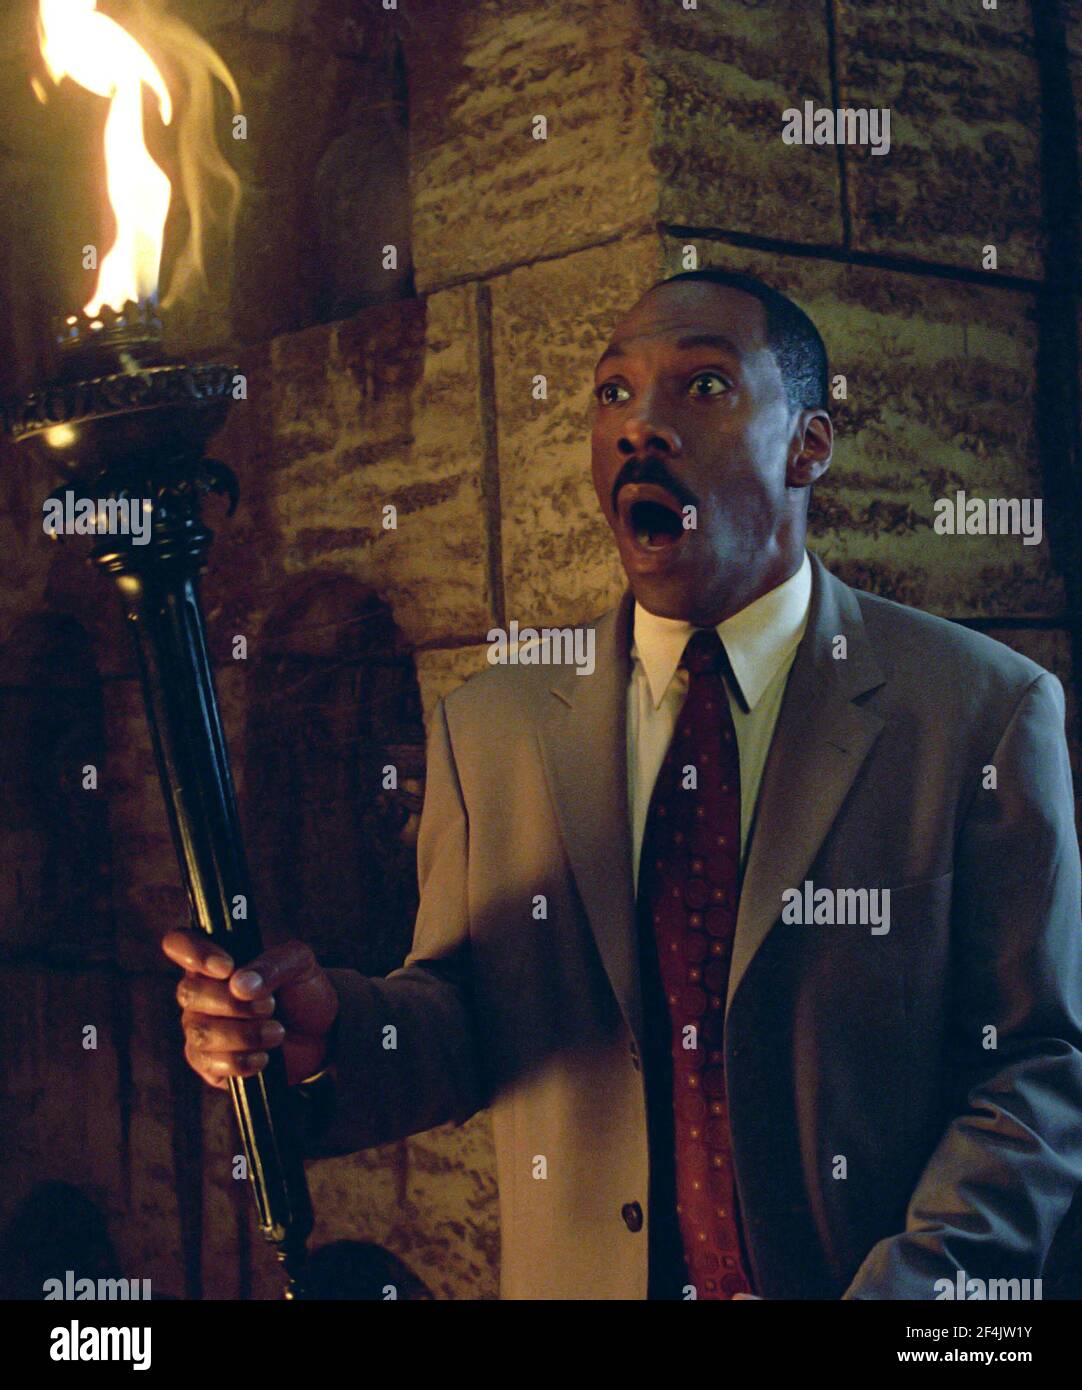 EDDIE MURPHY in THE HAUNTED MANSION (2003), directed by ROB MINKOFF. Credit: DISNEY ENTERPRISES / Album Stock Photo